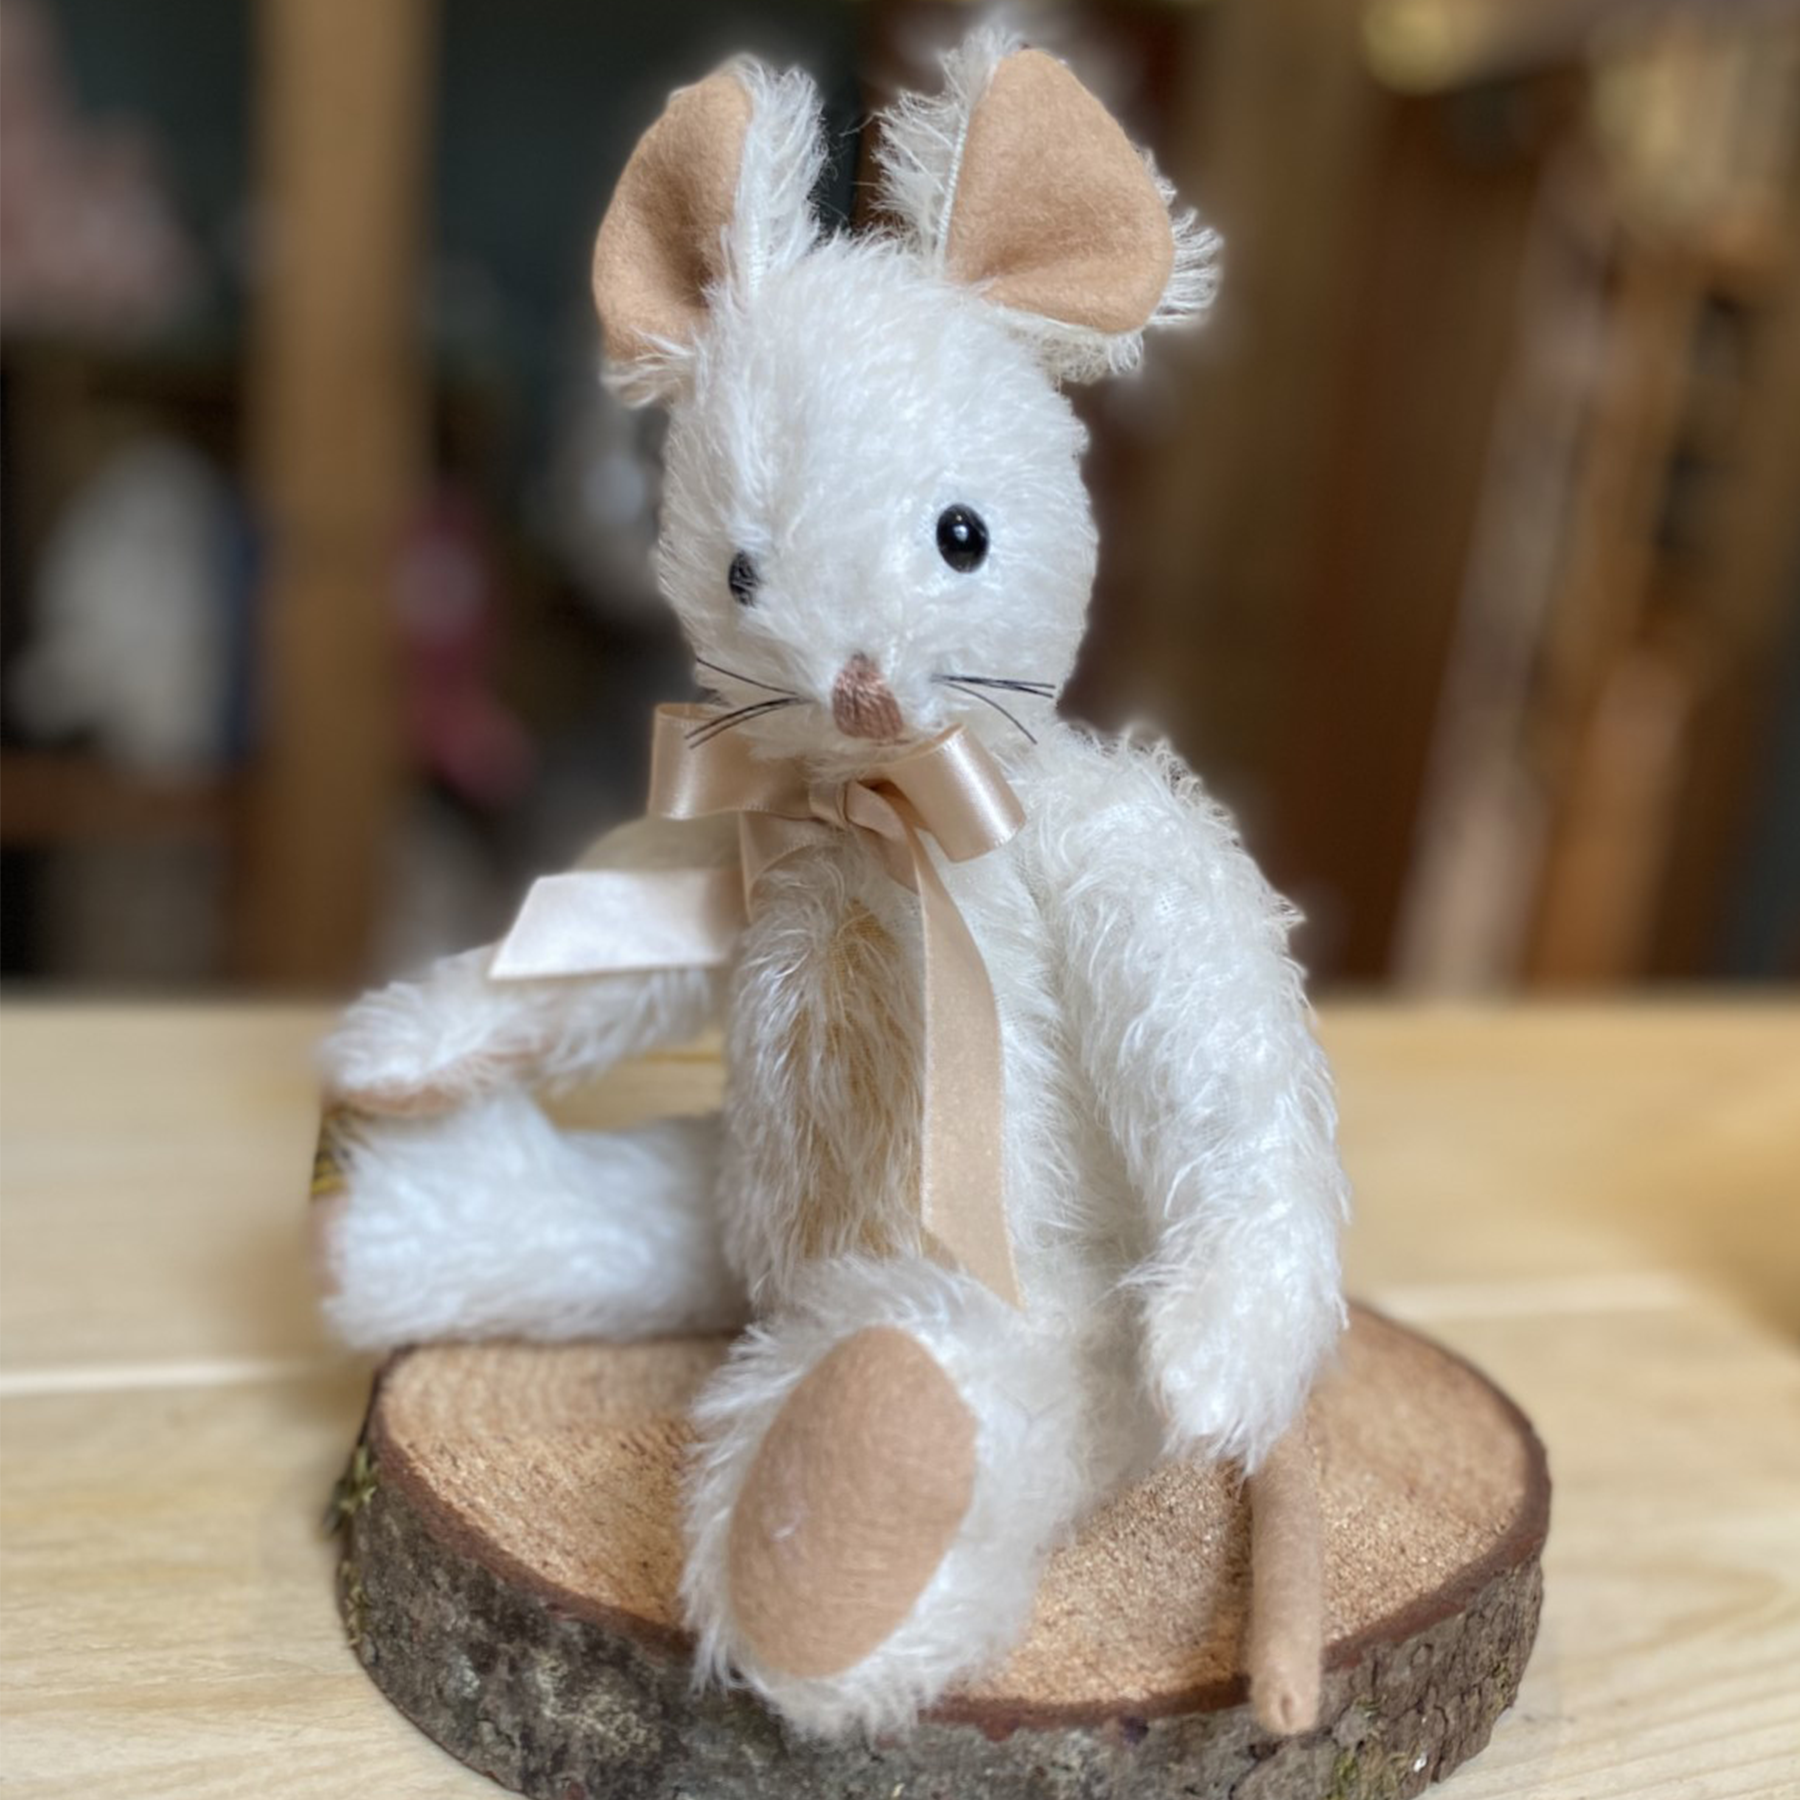 This characterful mouse has a particularly appealing expression, featuring hand-sewn whiskers and a little pinky nose. Her pure white mohair subtly contrasts a peachy-beige tummy, wool felt paws and slender tail.  Each Merrythought soft toy in the Traditional Collection is presented with a drawstring bag, to help keep your new companion clean and dust-free.